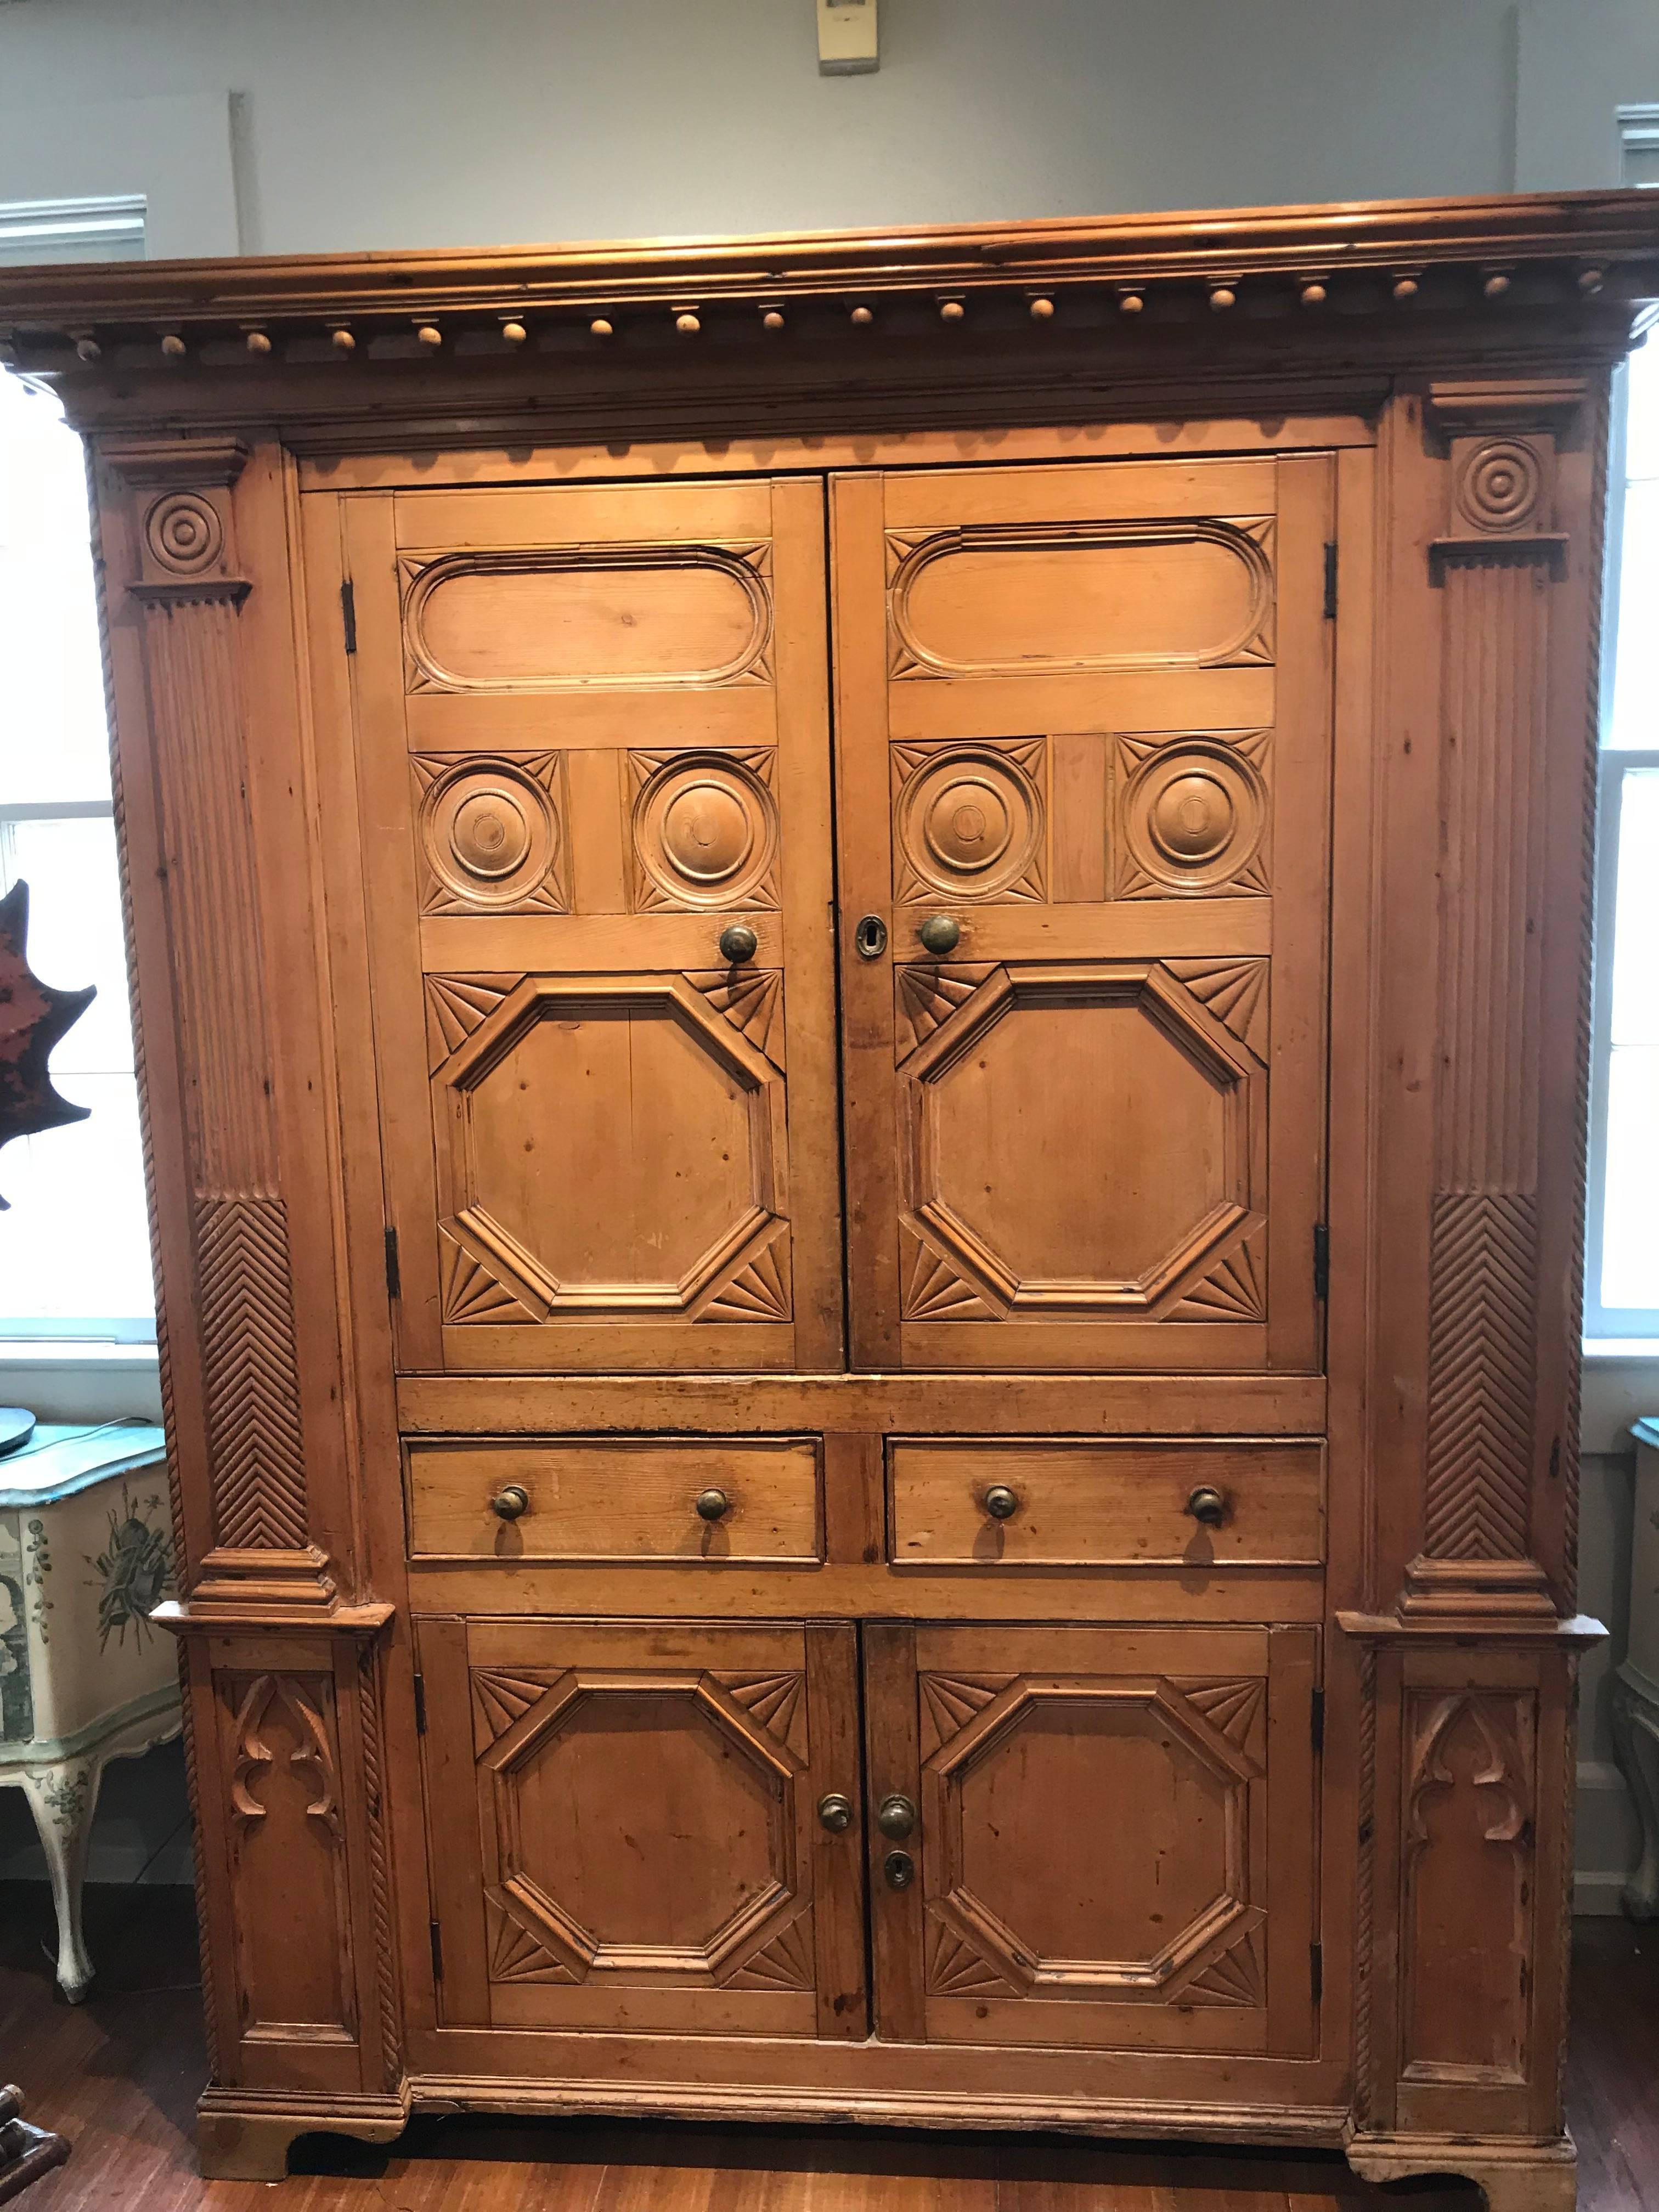 This extremely rare 19th century neoclassical revival Irish pine cabinet is a beautiful way to store your things. Two cupboard doors on top concealing two shelves, two drawers in center and two smaller cupboard doors hiding one shelf. Golden colored